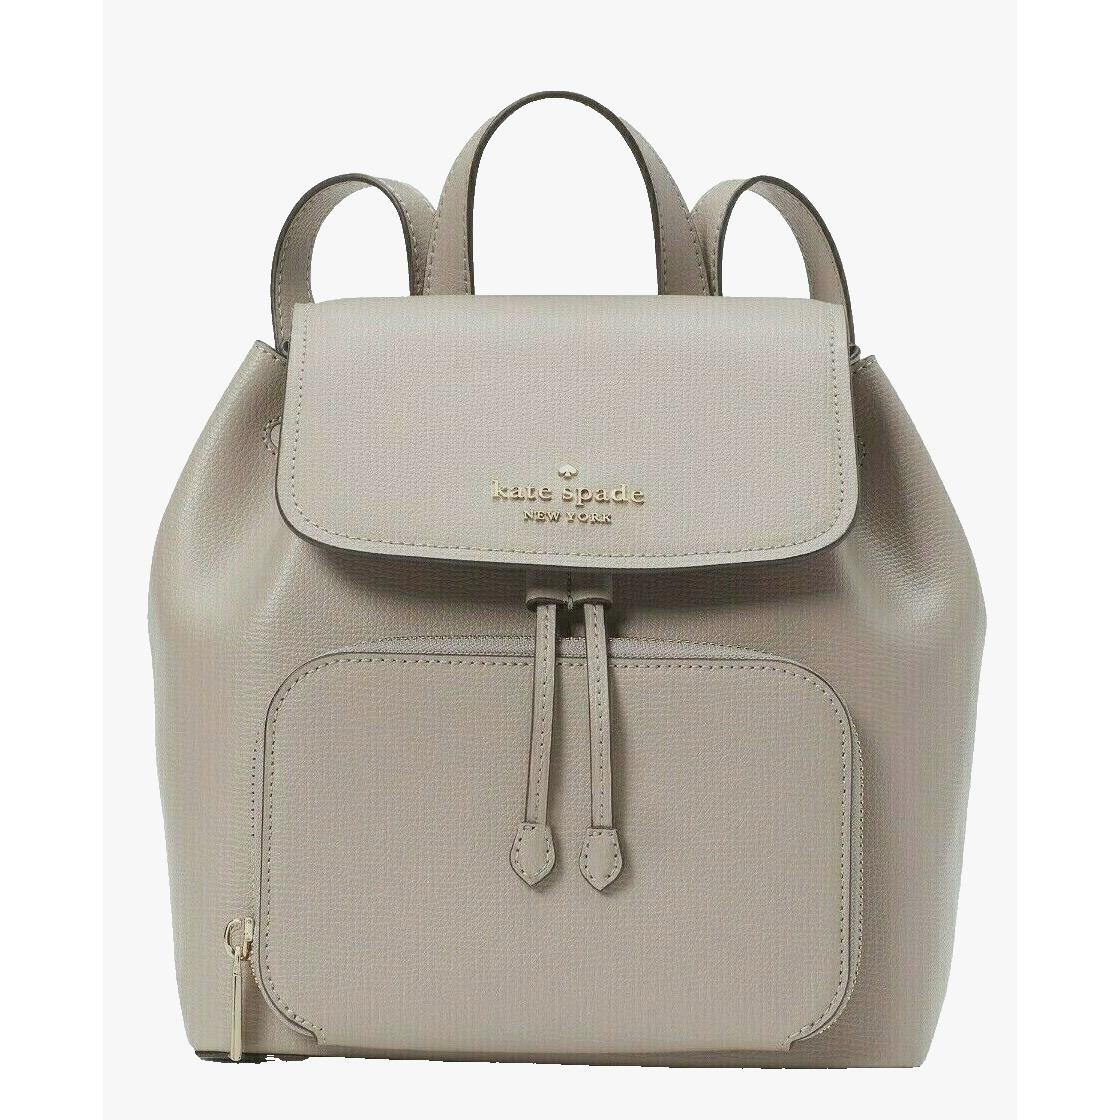 New Kate Spade Darcy Medium Flap Backpack Refined Grain Leather Warm Taupe